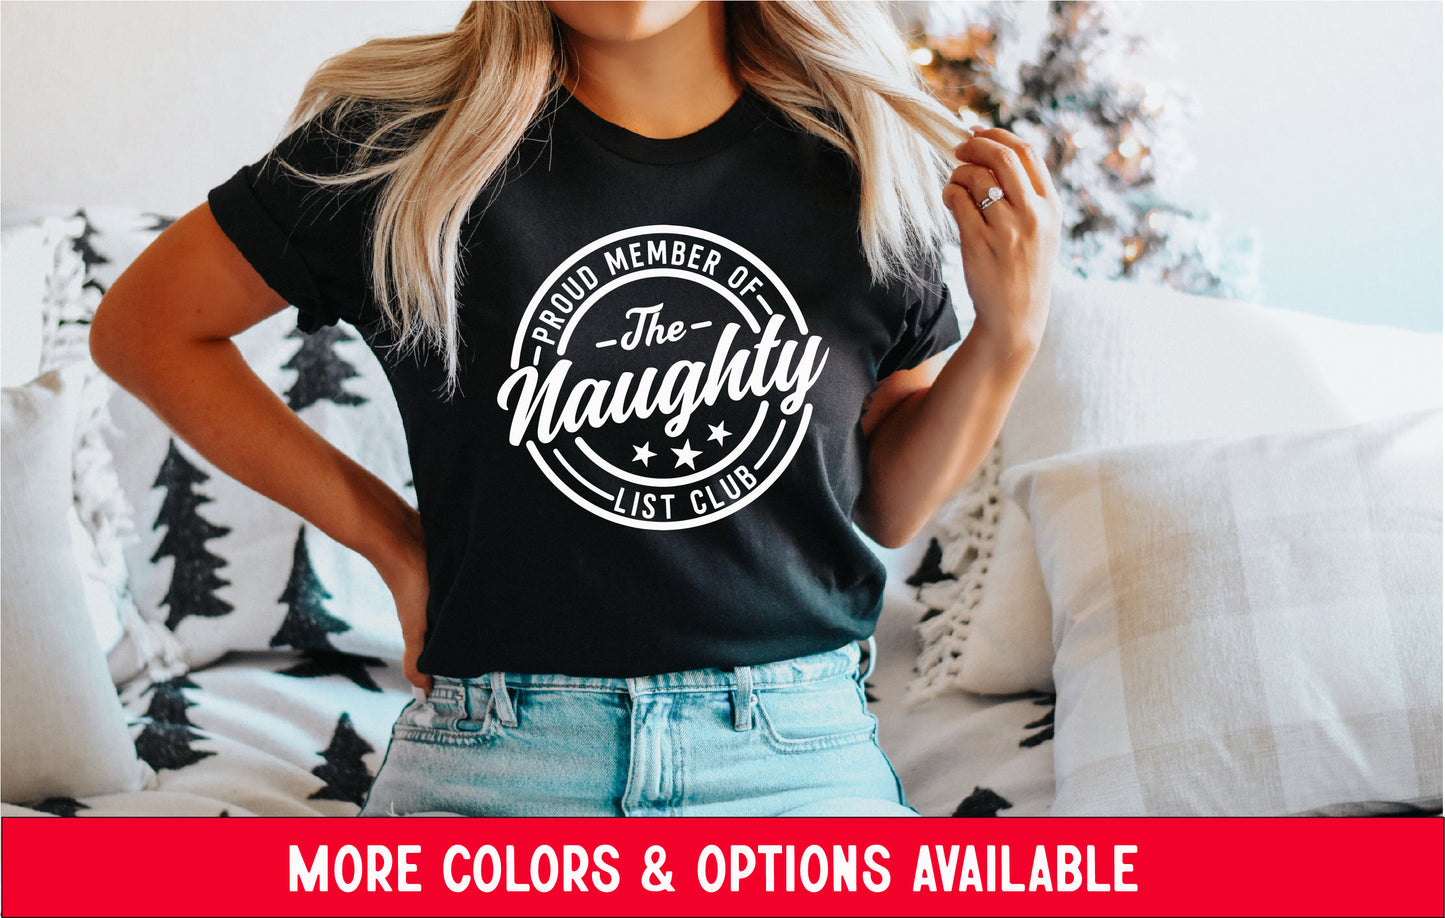 NAUGHTY LIST SHIRT <br> More colors available